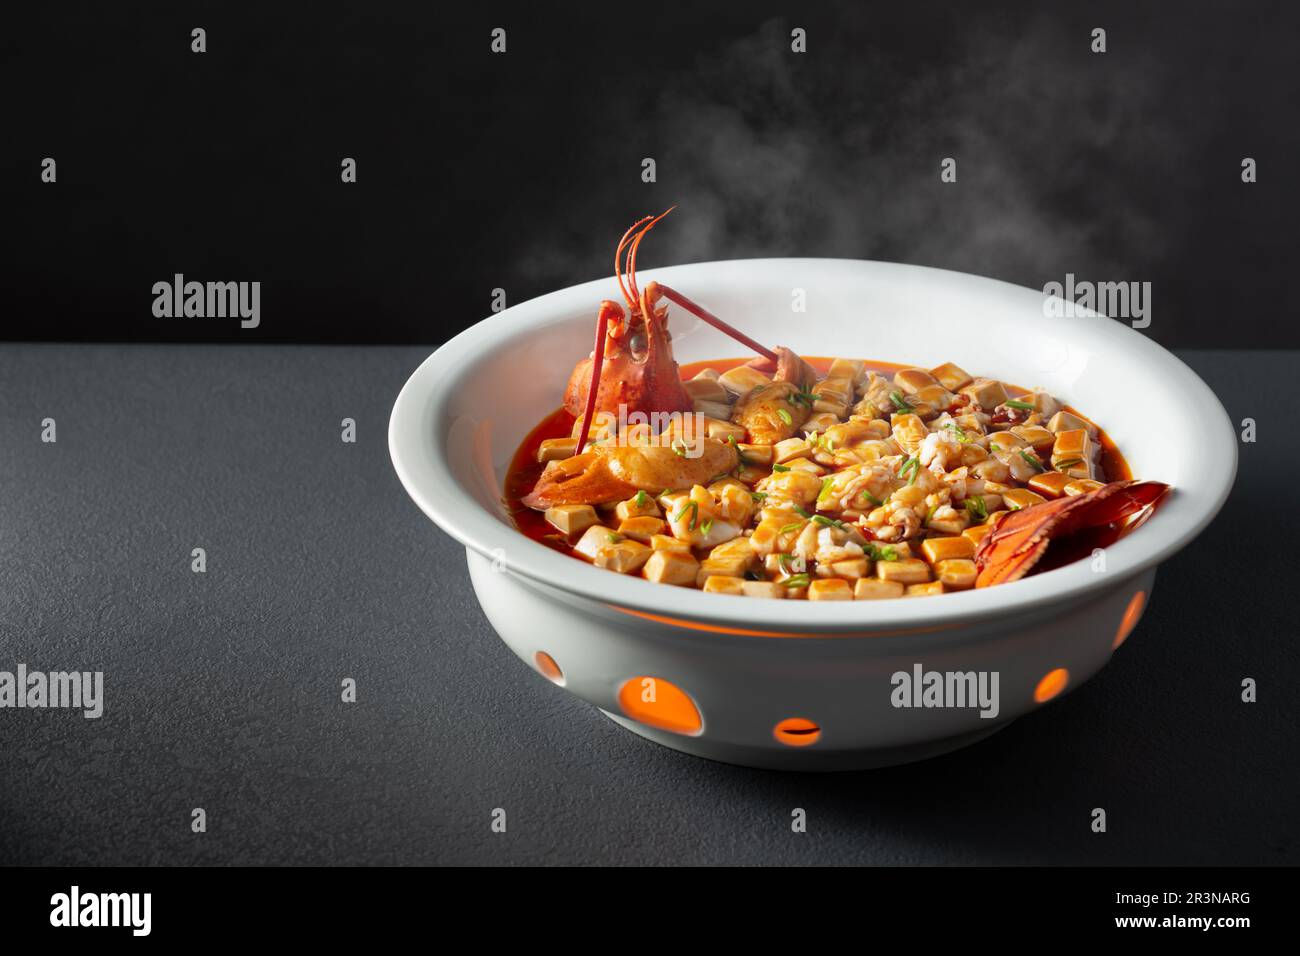 Mapo Tofu with lobster（spiny rock lobster ） Stock Photo